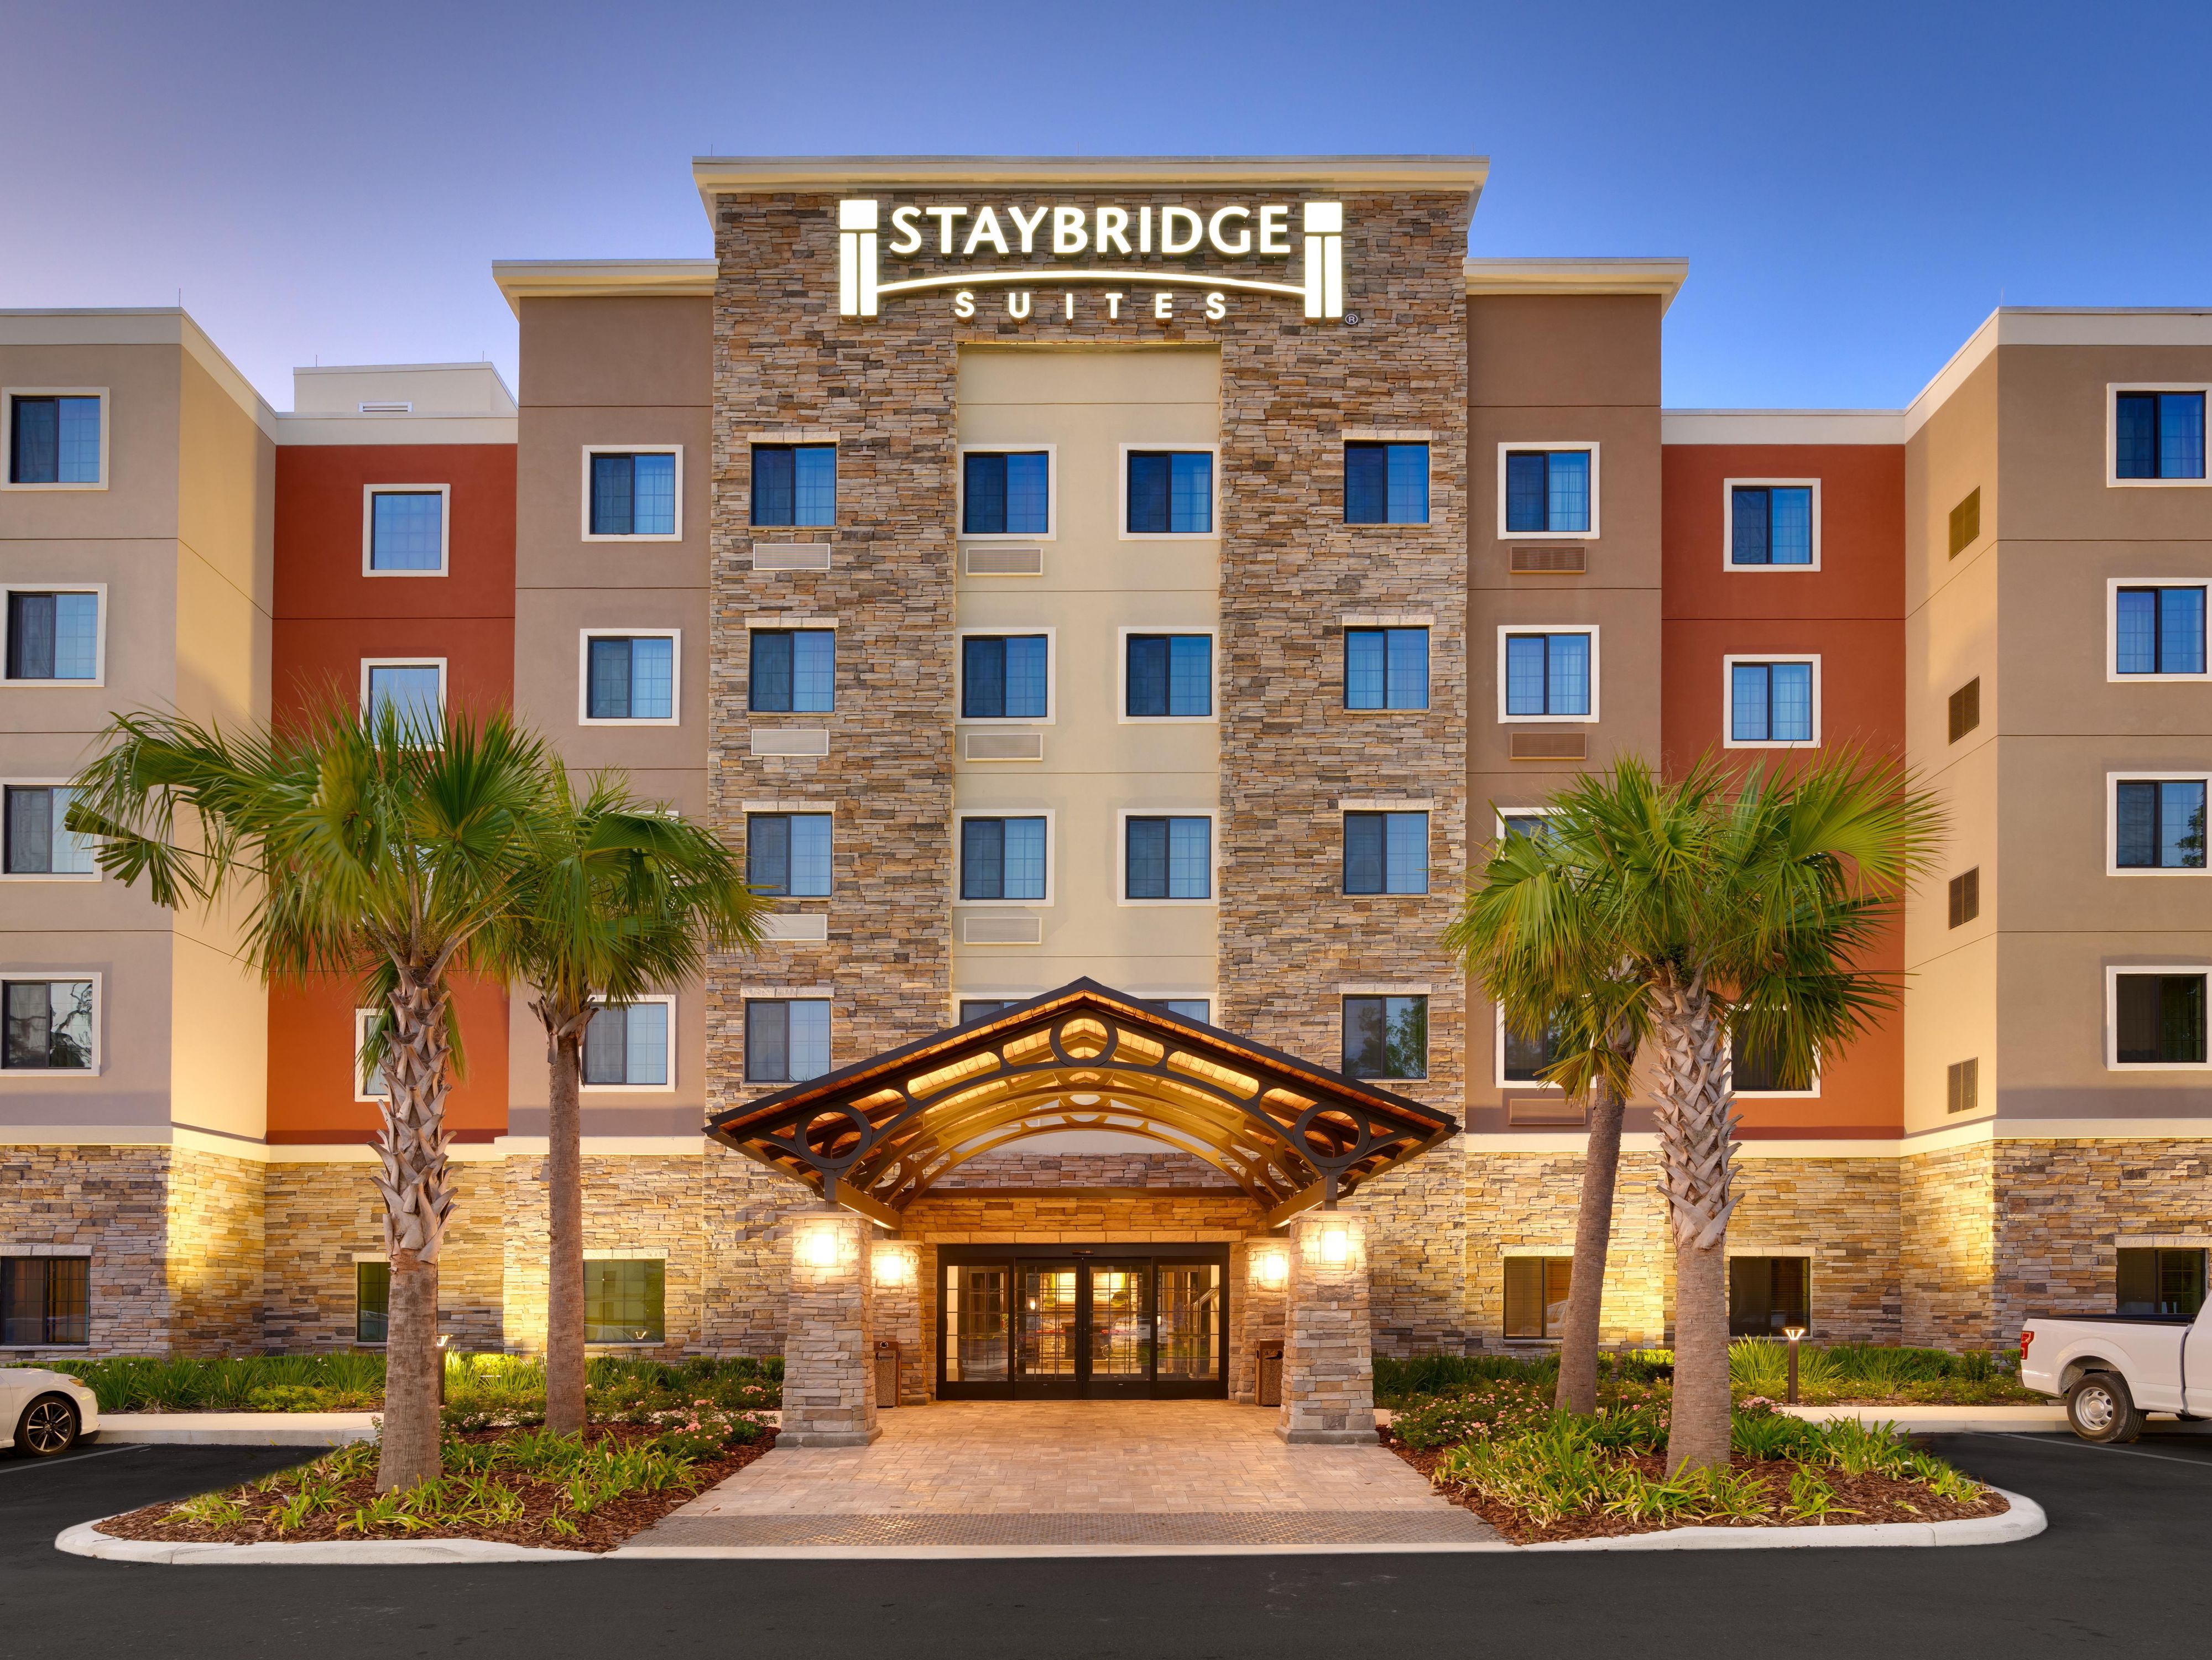 Extended Stay near I-75 Gainesville  Staybridge Suites Gainesville